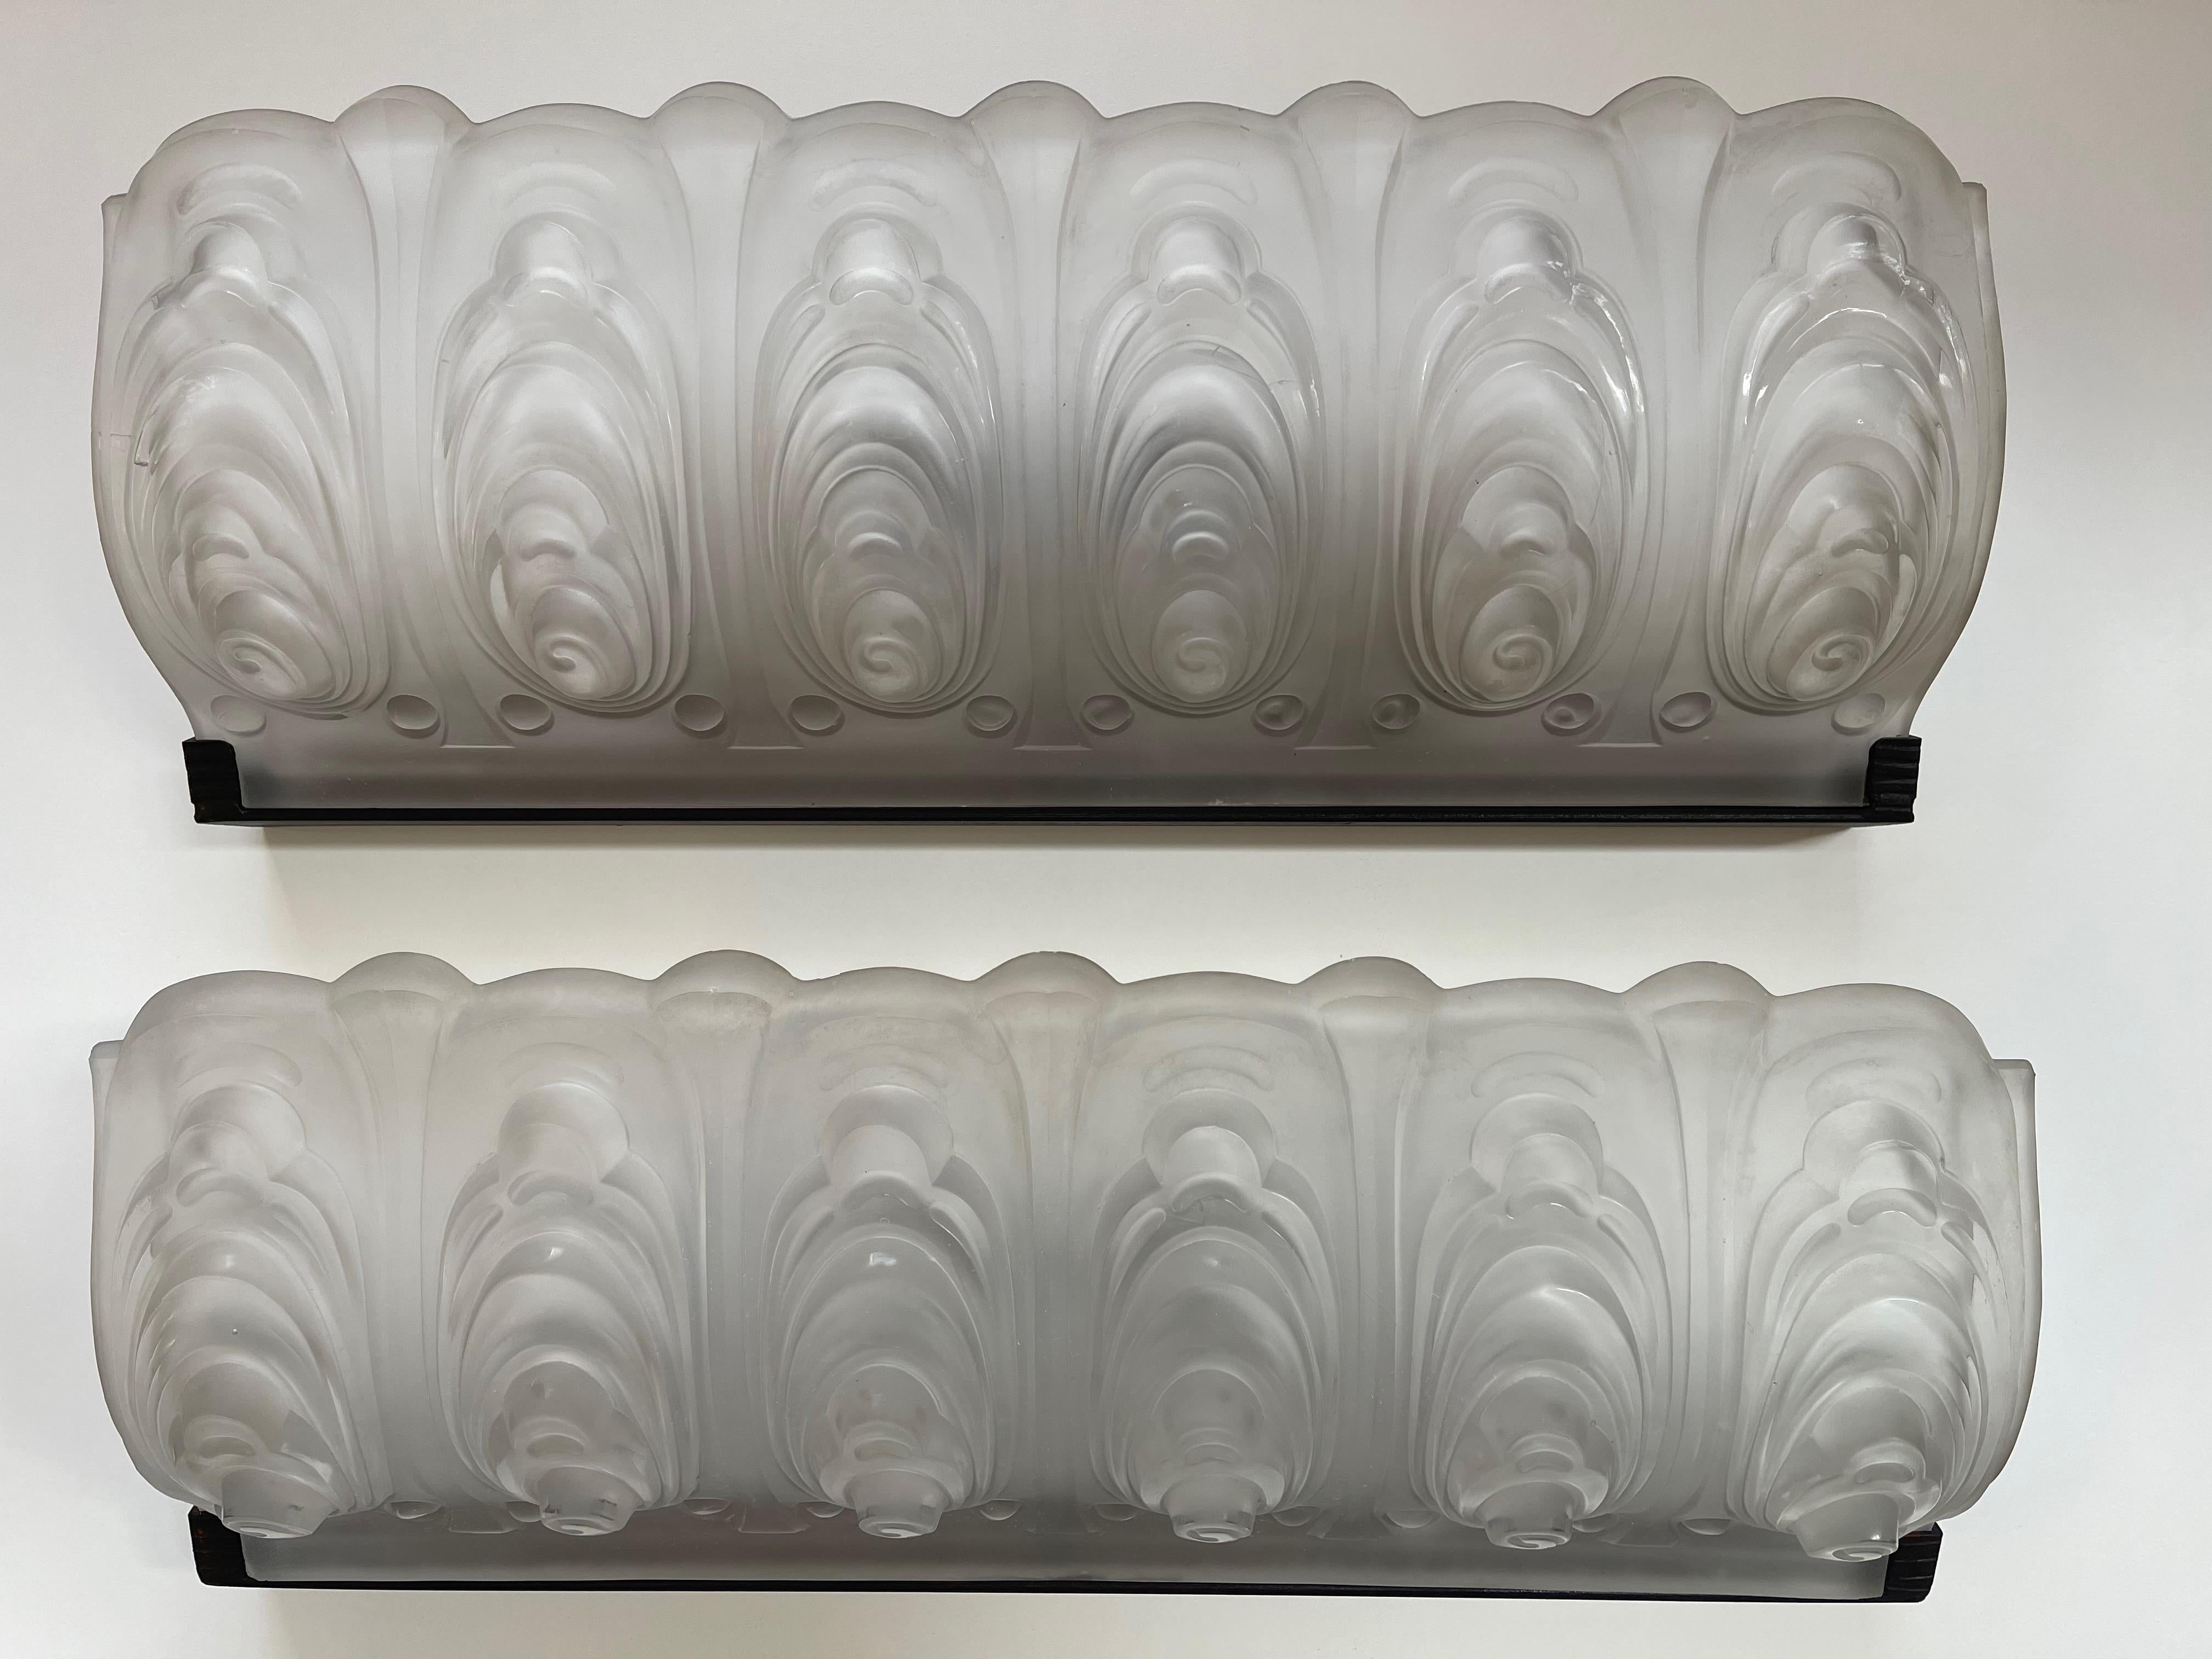 Large pair of art deco sconces attributed to Georges Leleu in molded glass, hammered iron frame.
In very good condition and electrified.

Measures: Width: 50cm
Height: 19.5cm
Depth: 11.5cm
Weight: 8 Kg.